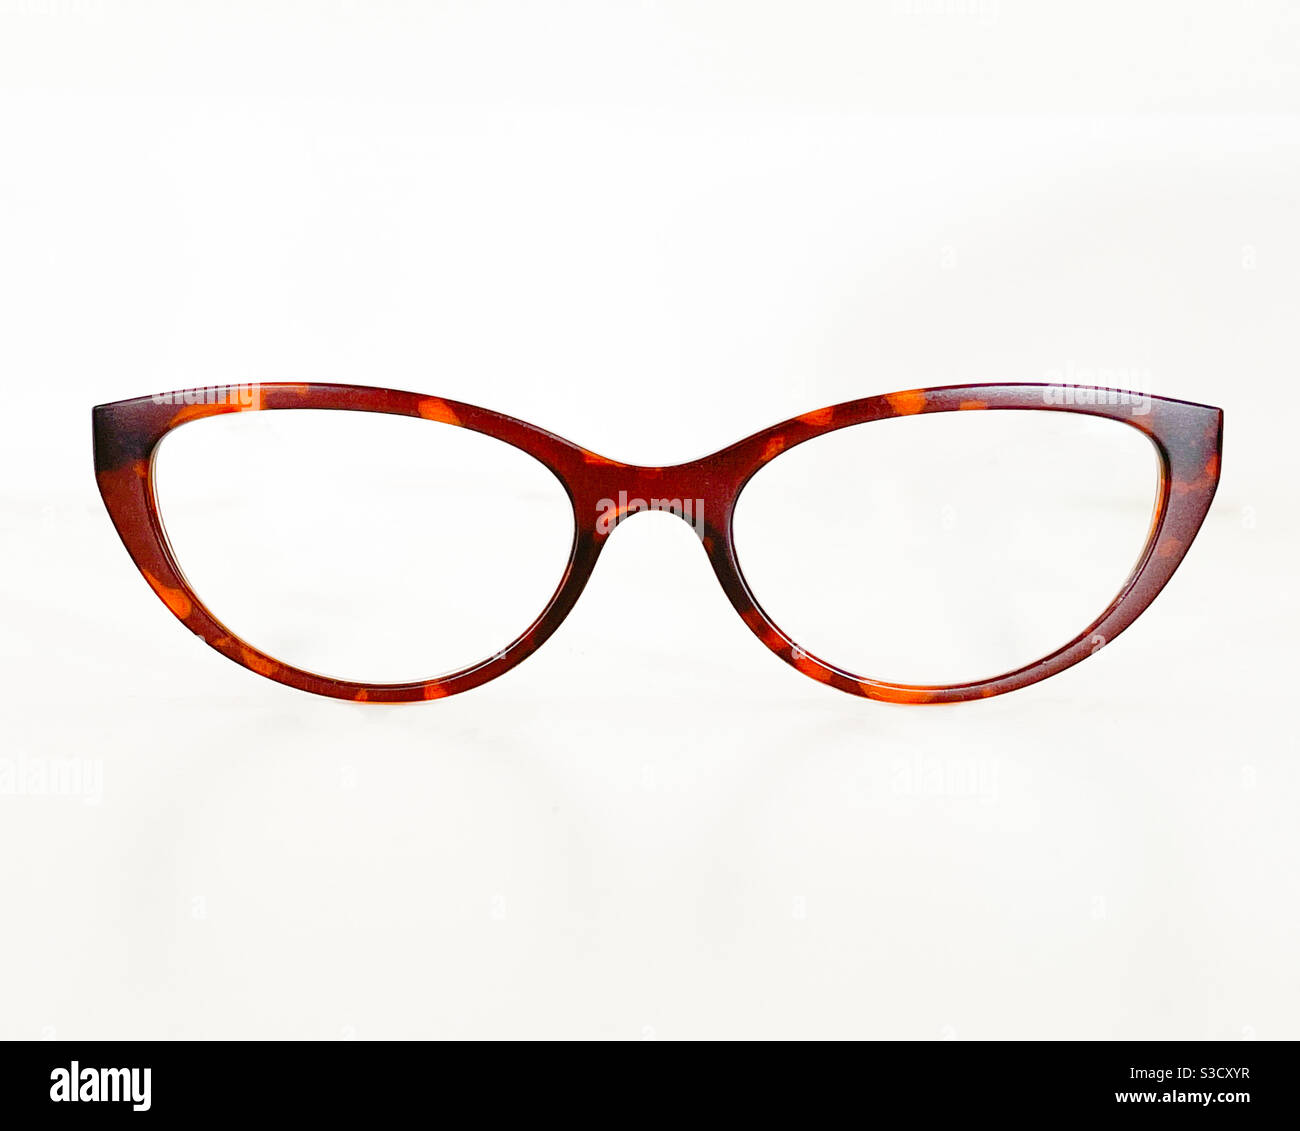 Front view of a pair of tortoiseshell colour glasses frames in a cats eye shape on a plain white background. No people. Copy space. Stock Photo